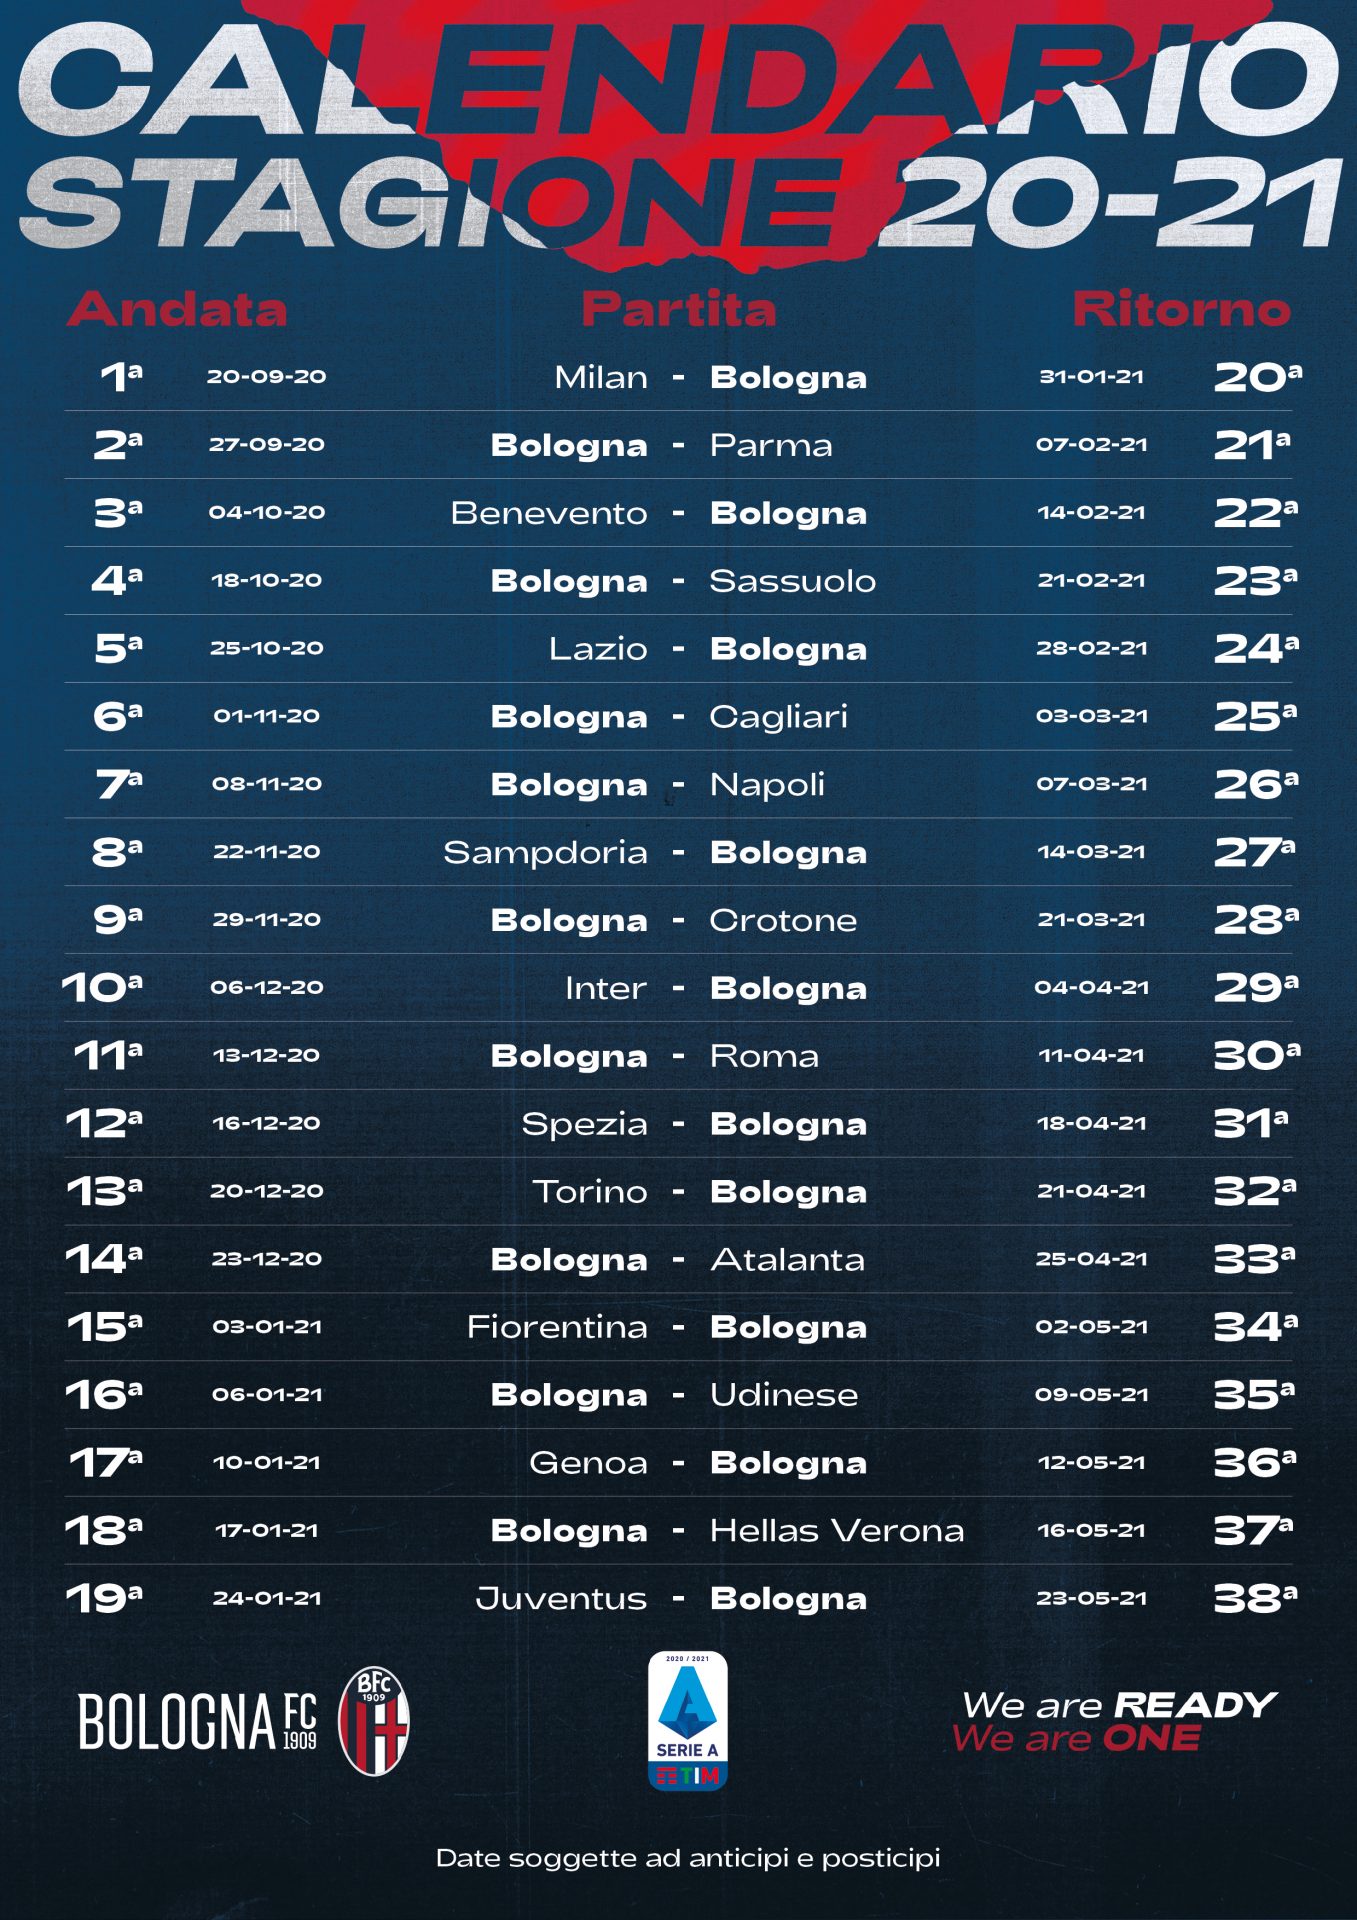 Our Serie A schedule for 2020/21 | BolognaFC